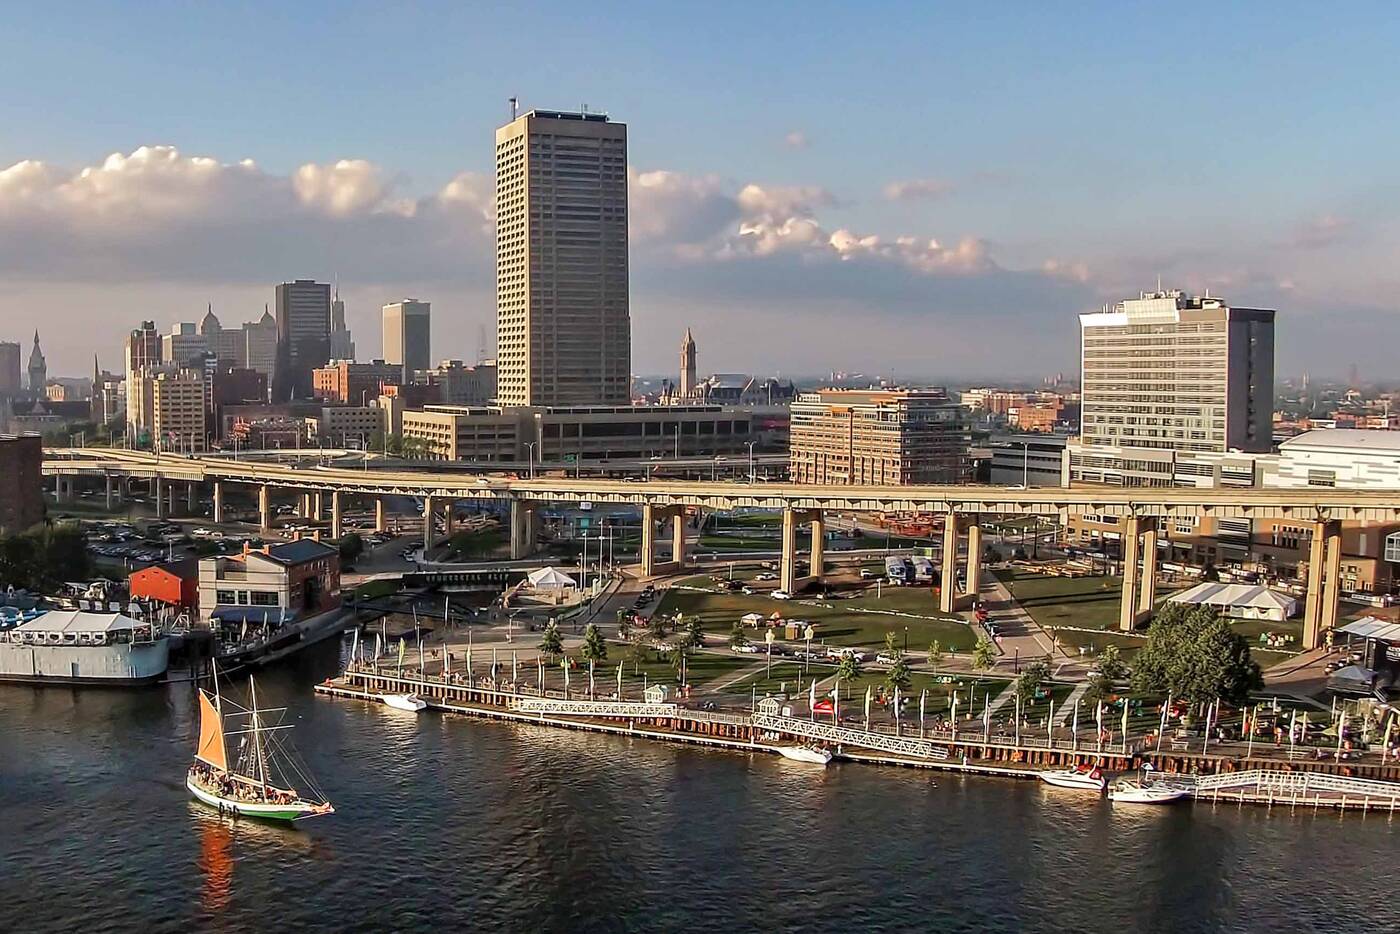 17 things to do the next time you visit Buffalo